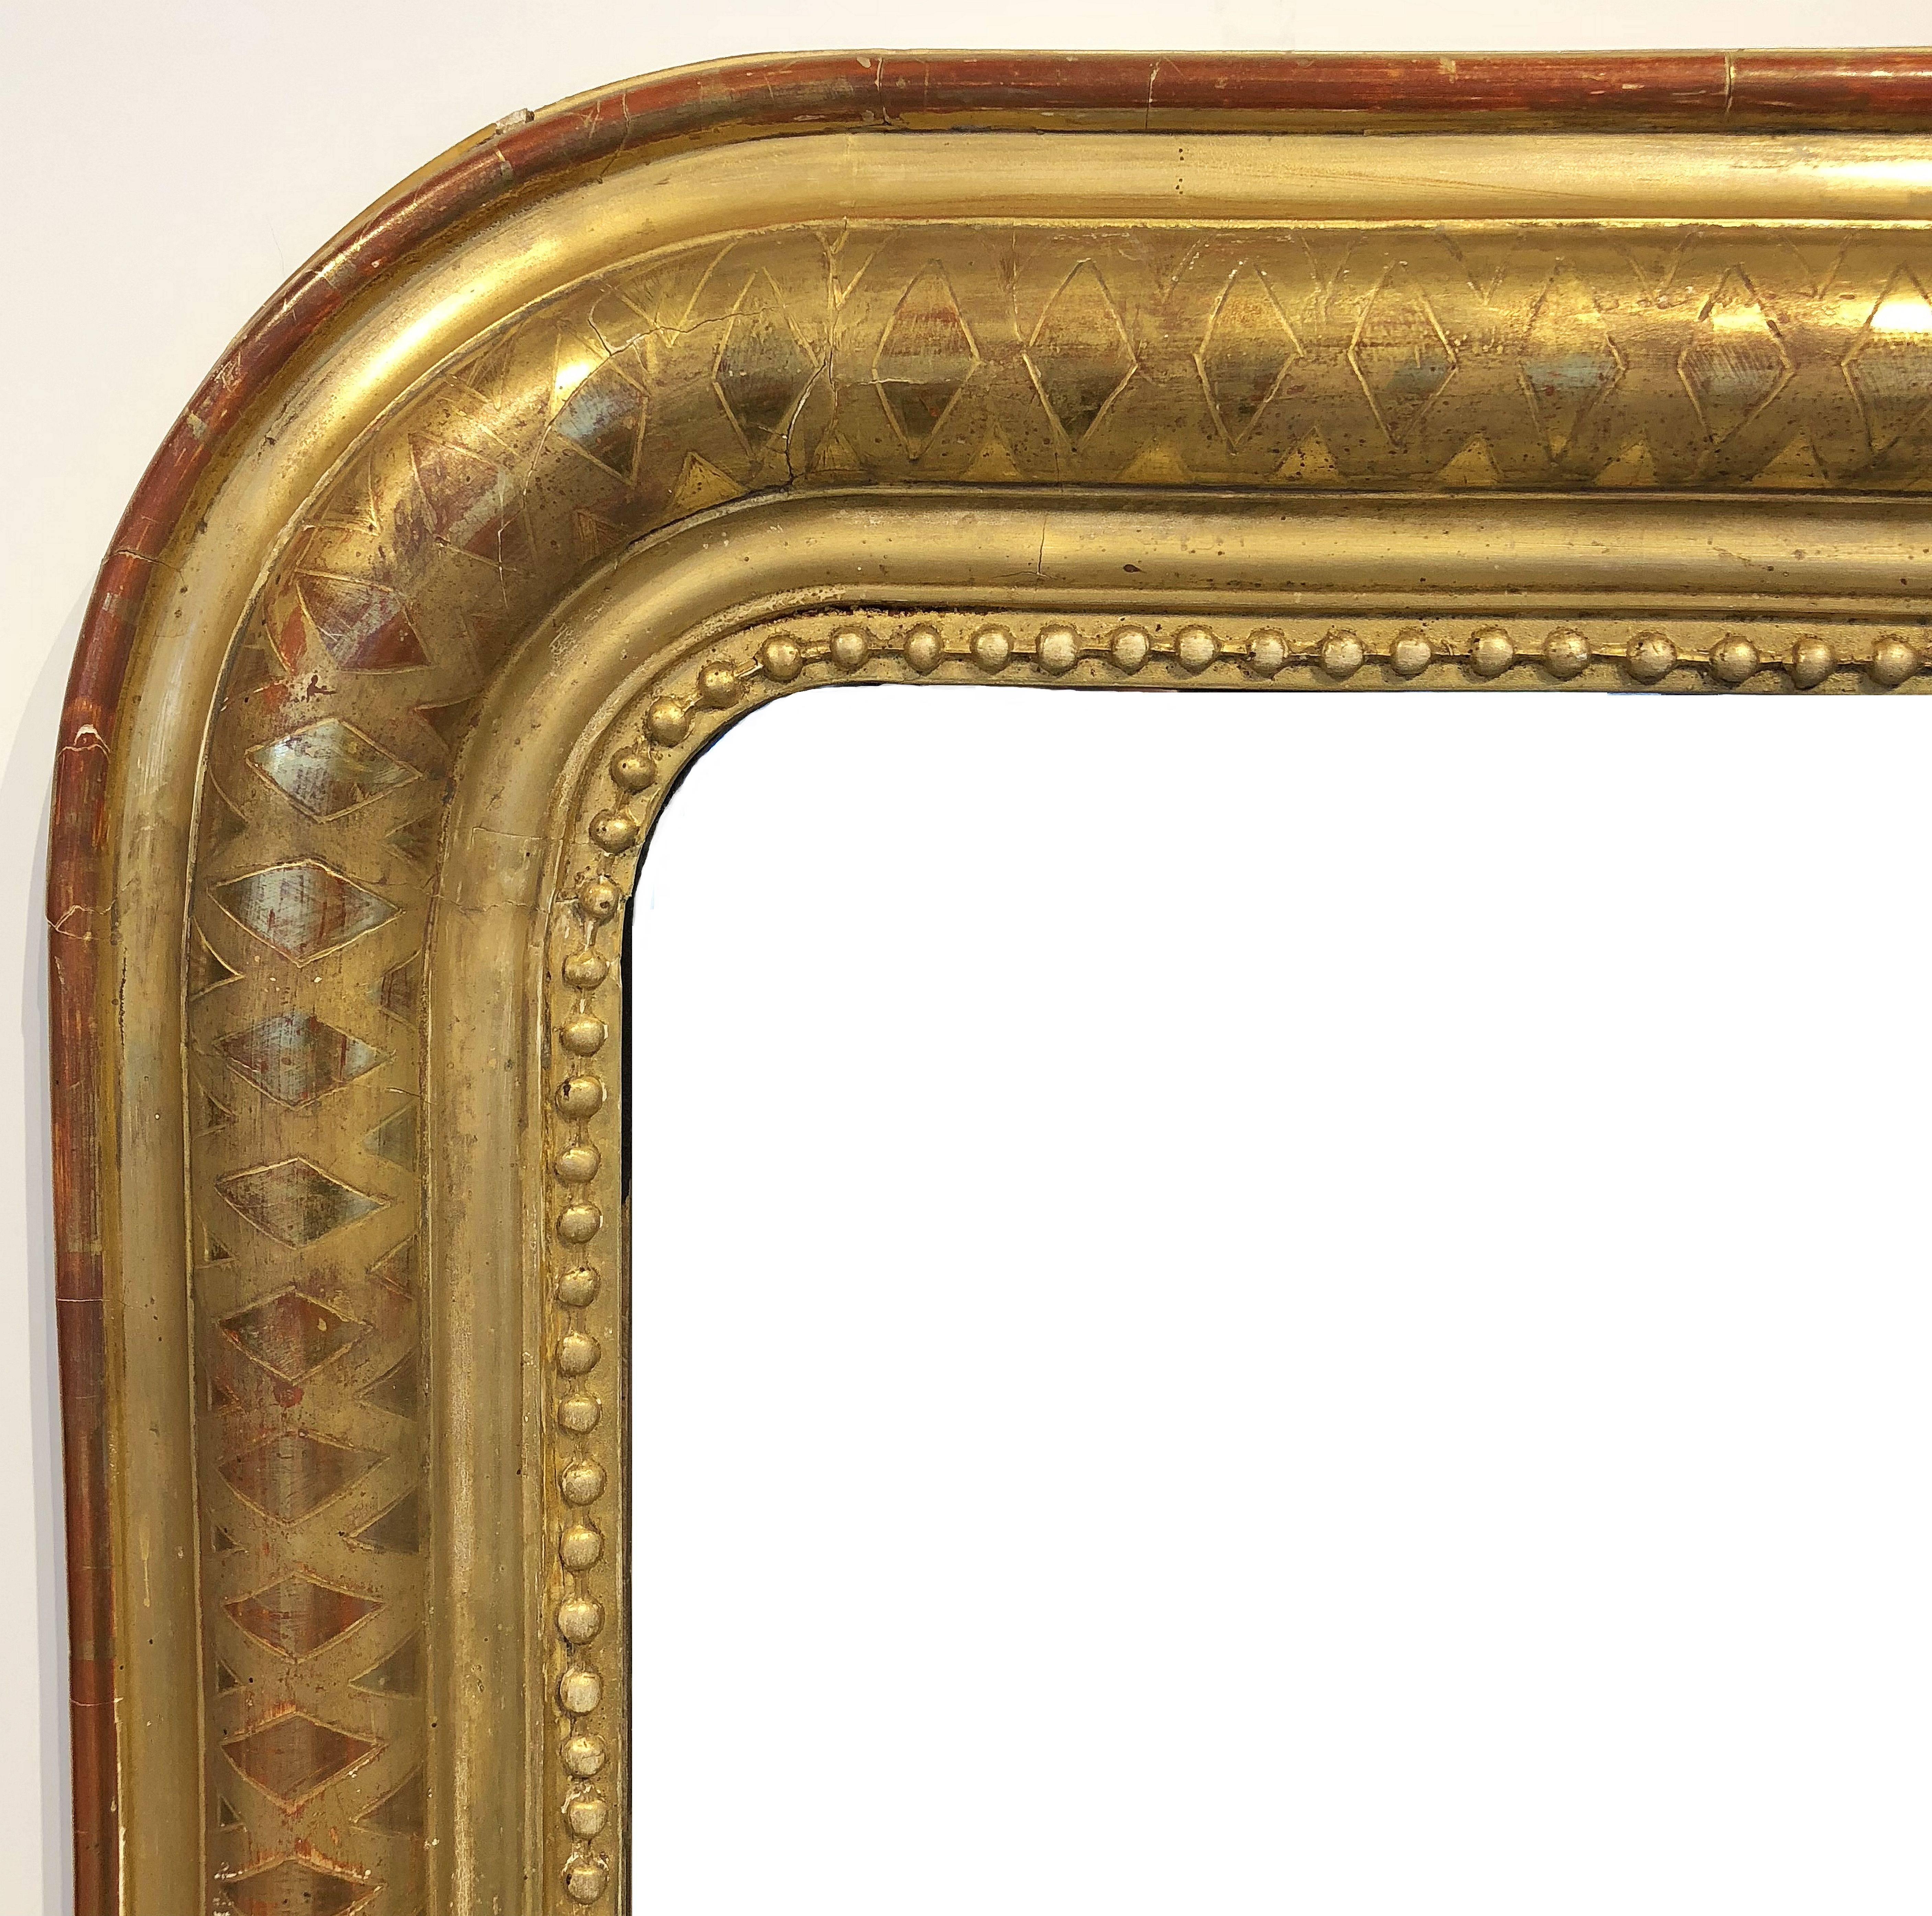 A fine Louis Philippe wall mirror featuring a moulded surround with a beautiful patinated gold-leaf.

Dimensions: H 56 inches x W 35 inches

Other sizes available in this style.